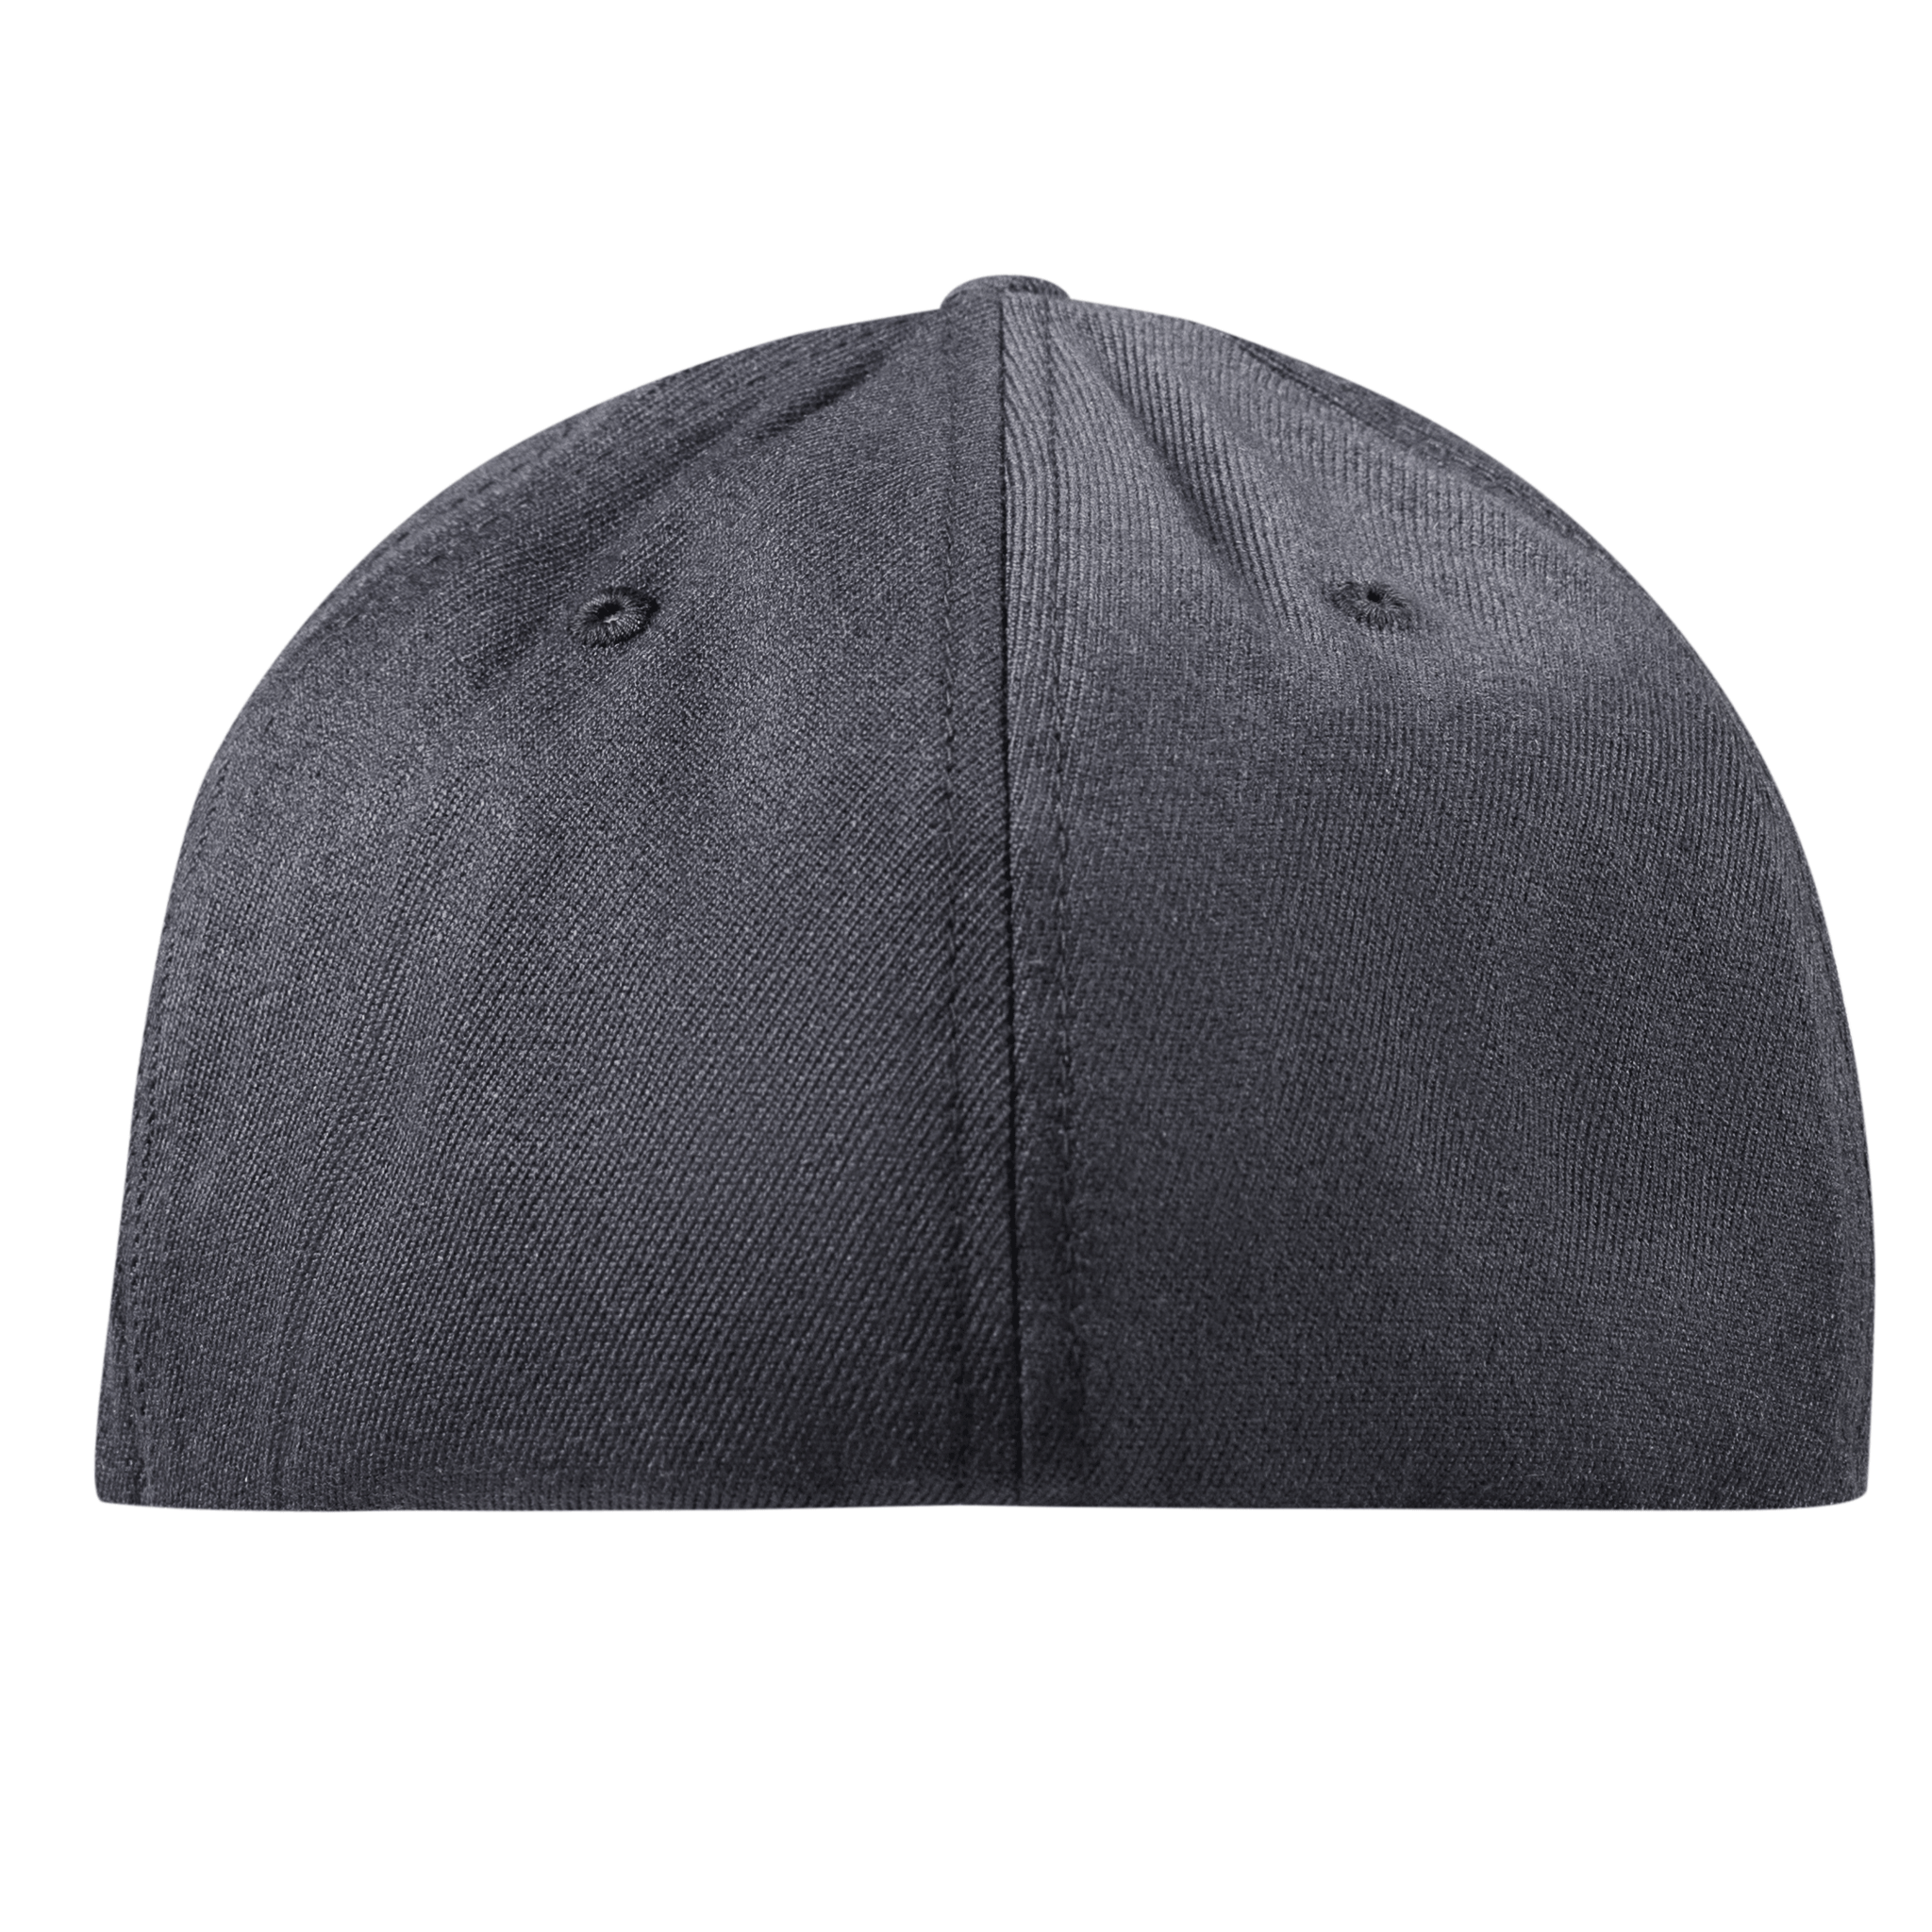 Ohio Turquoise Flexfit Fitted Back Charcoal